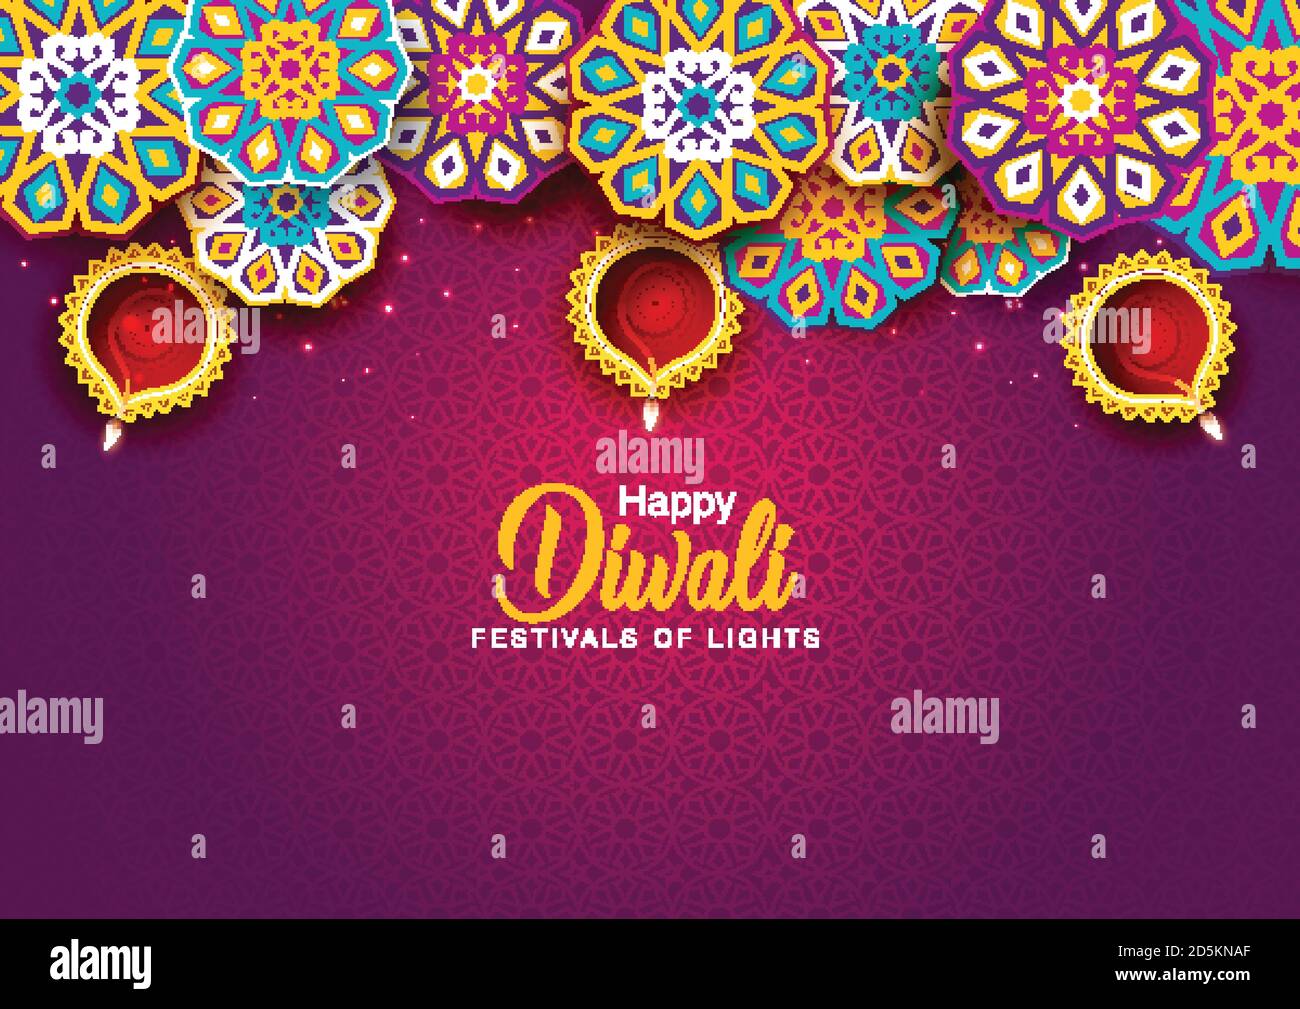 Happy Diwali celebration background. Top view of banner design decorated with illuminated oil lamps on patterned yellow background. vector illustratio Stock Vector